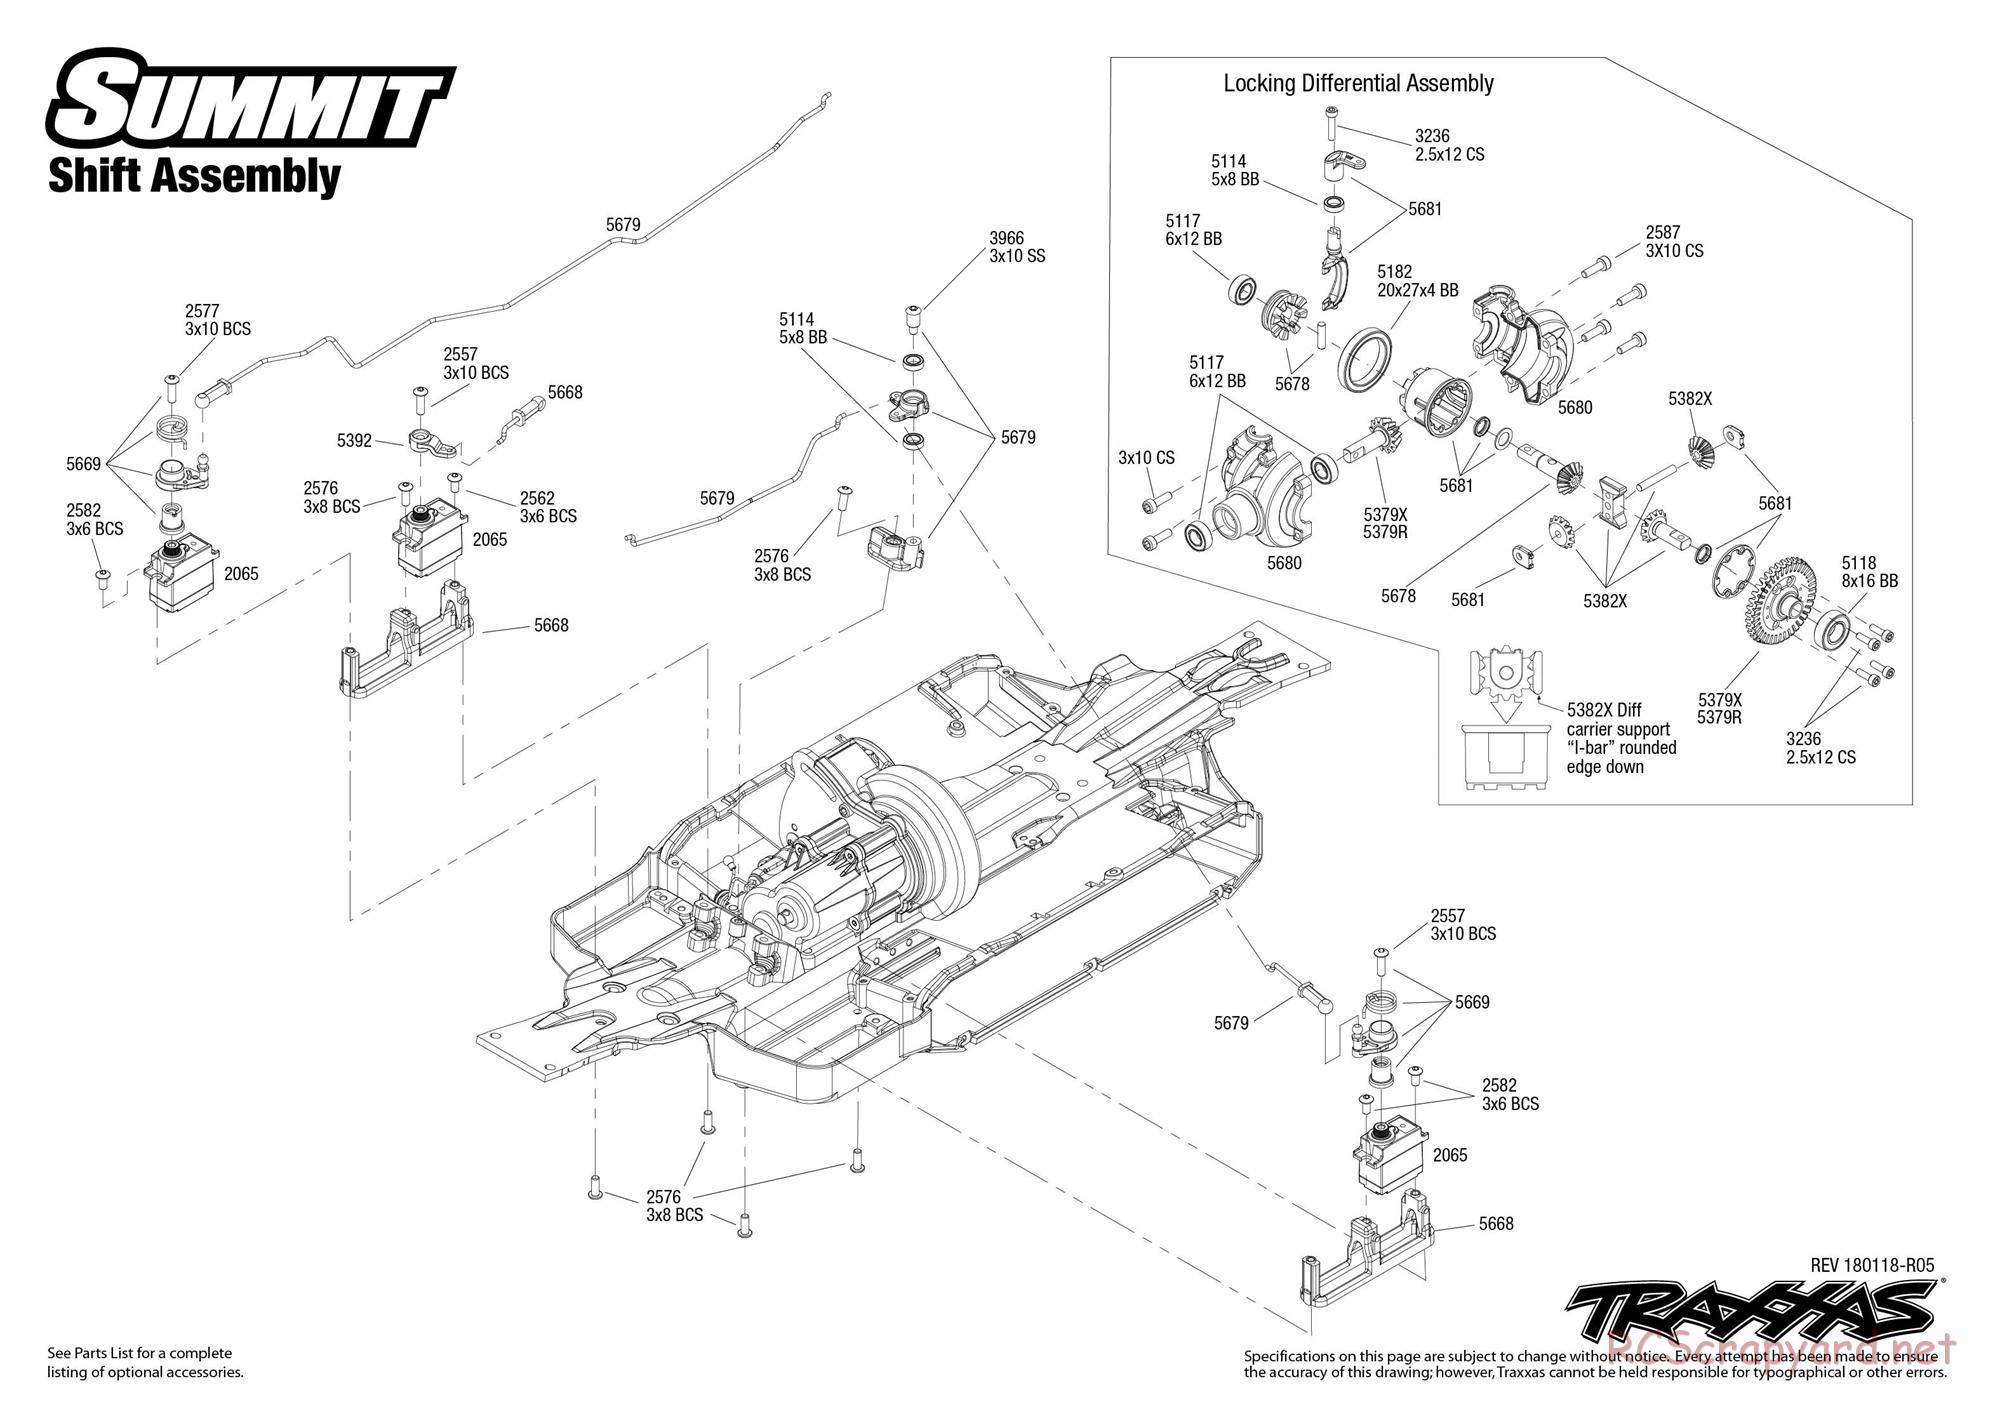 Traxxas - Summit (2015) - Exploded Views - Page 6